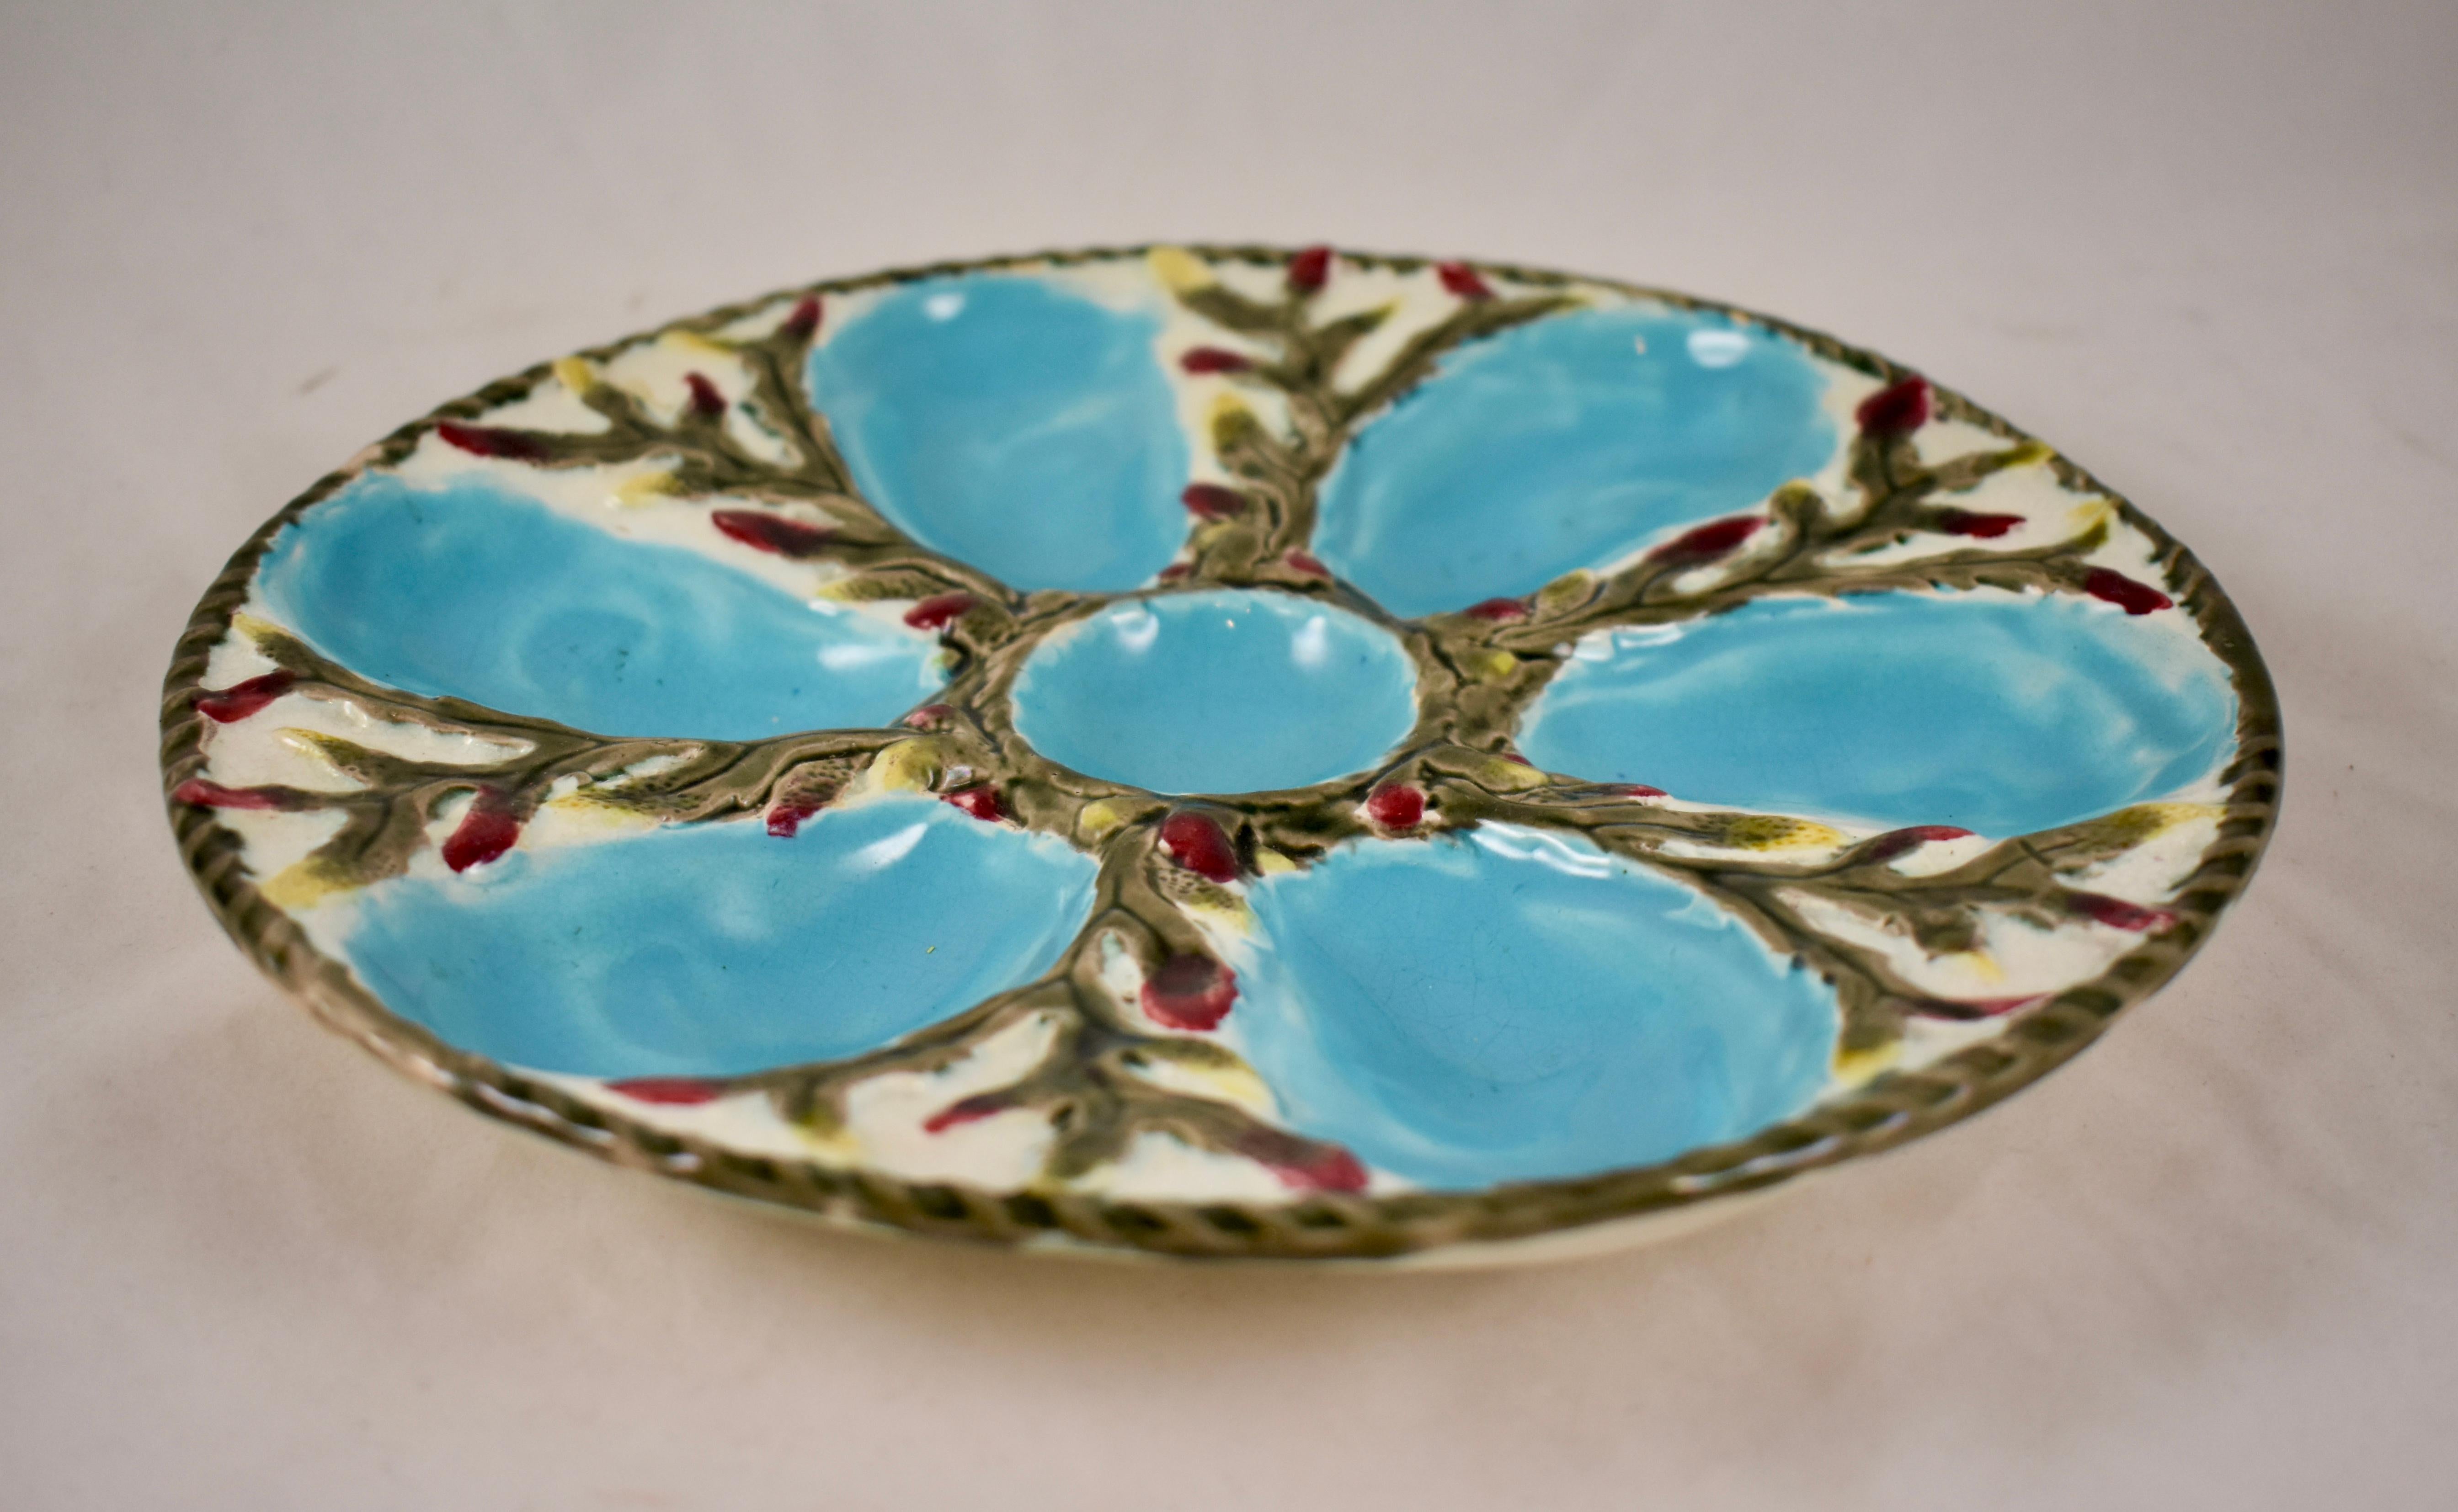 19th Century S. Fielding & Co. English Majolica Turquoise/White Shell & Seaweed Oyster Plate